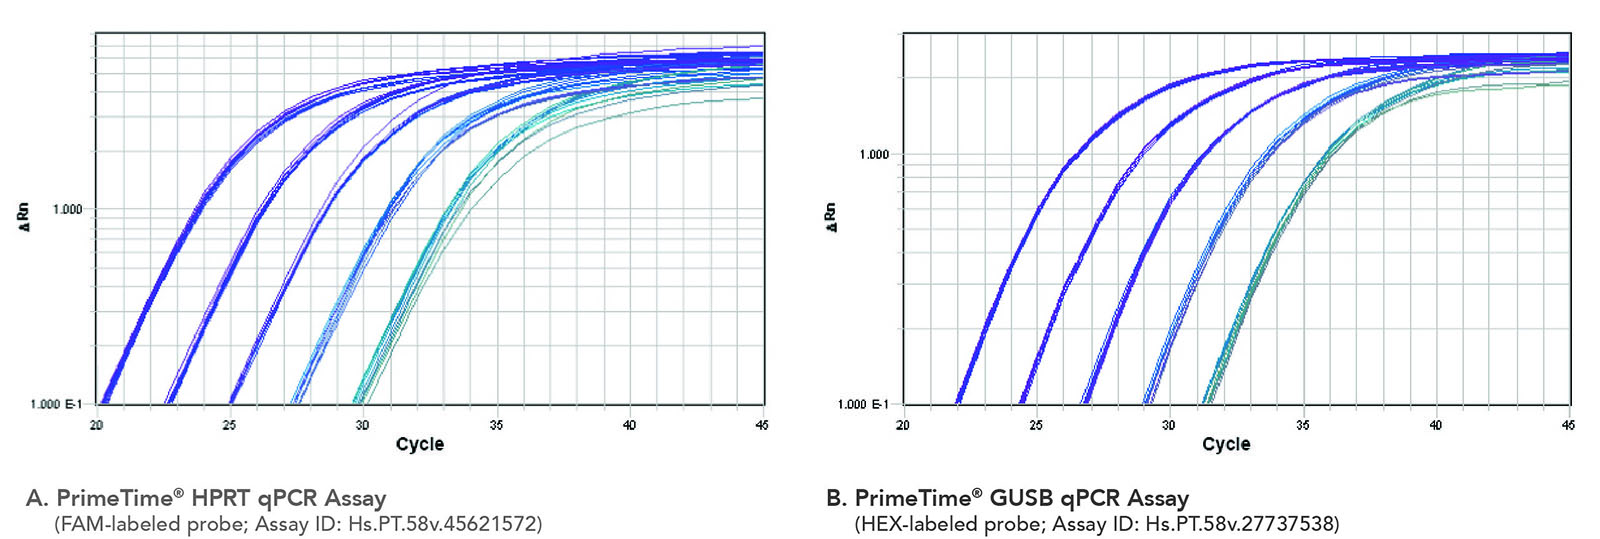 Line charts showing the dRn on the x axis over the amount of cycles on the y axis for the PrimeTime HPRT qPCR Assay, FAM-labeled in the left chart and PrimeTime GUSB qPCR Assay, HEX-labeled in the right chart.